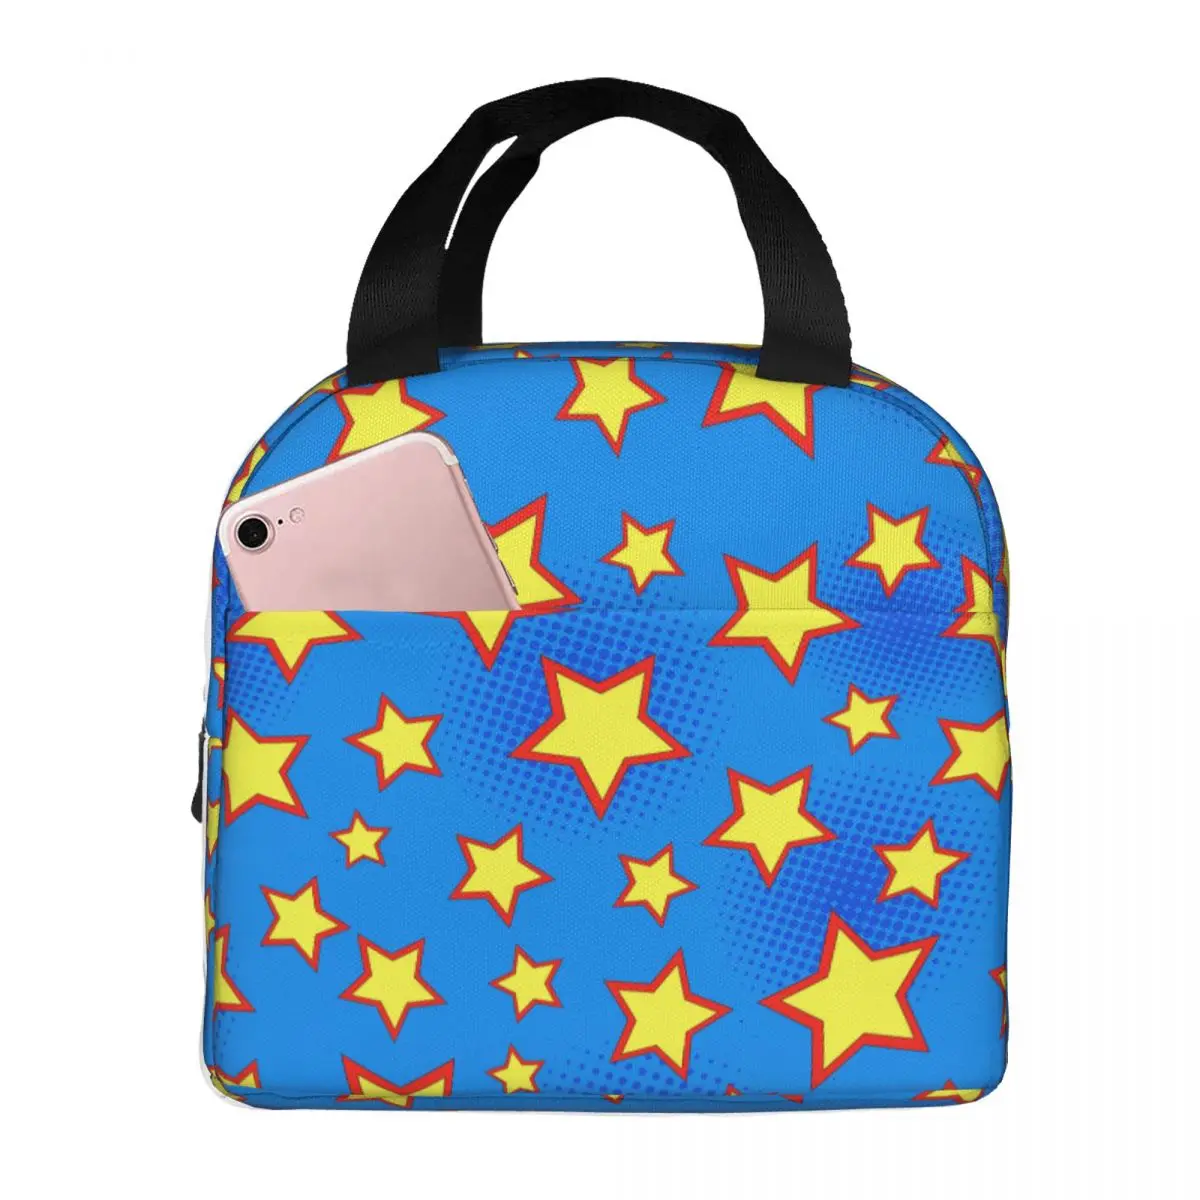 Superhero Stars Lunch Bags Portable Insulated Oxford Cooler Thermal Food Picnic Lunch Box for Women Children